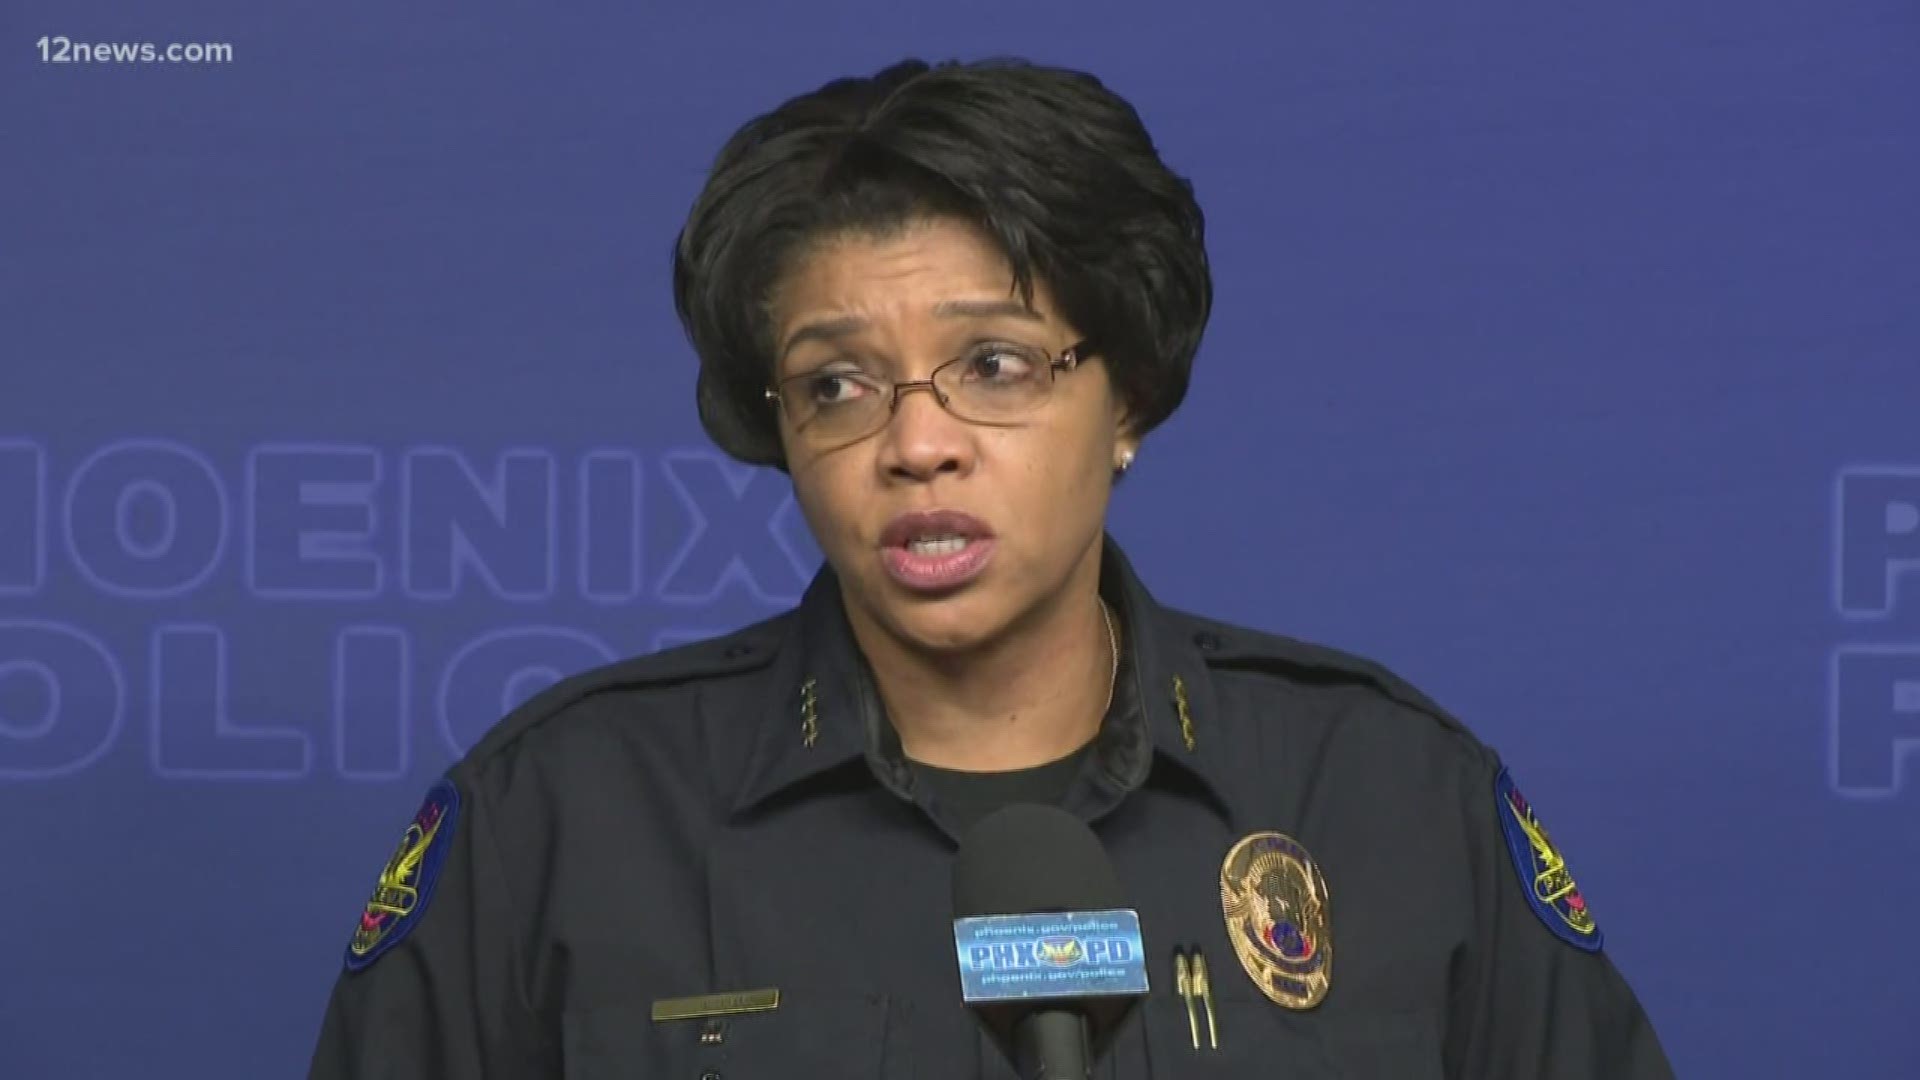 The Phoenix police disciplinary review board only recommended 6 weeks' suspension for one of the officers, but Chief Jeri Williams decided to terminate him.